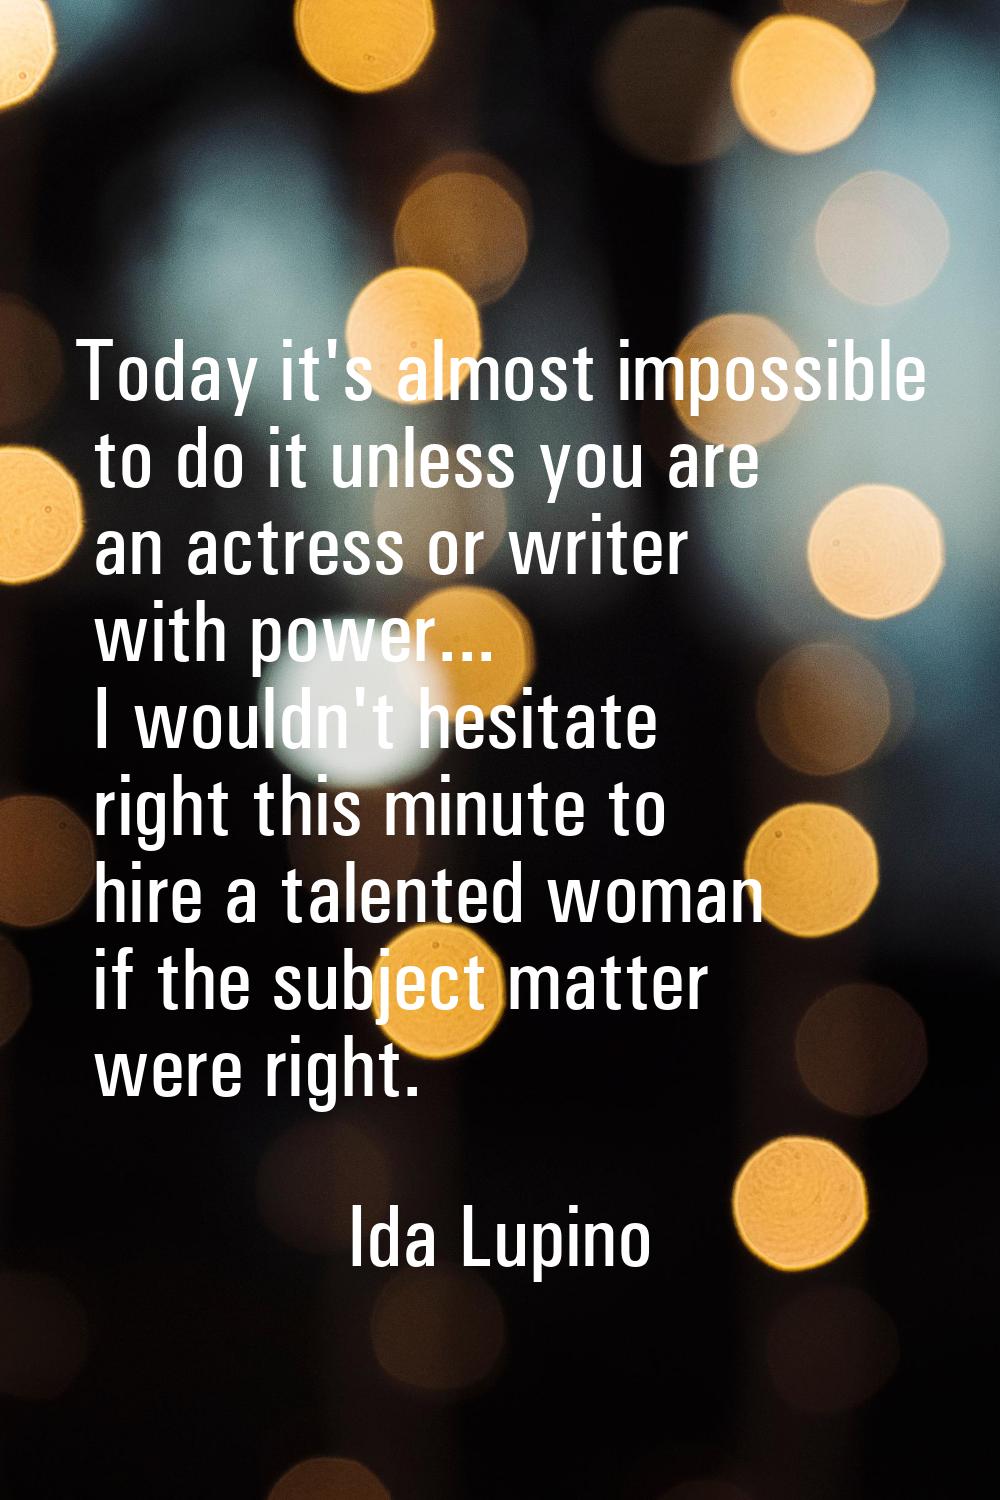 Today it's almost impossible to do it unless you are an actress or writer with power... I wouldn't 